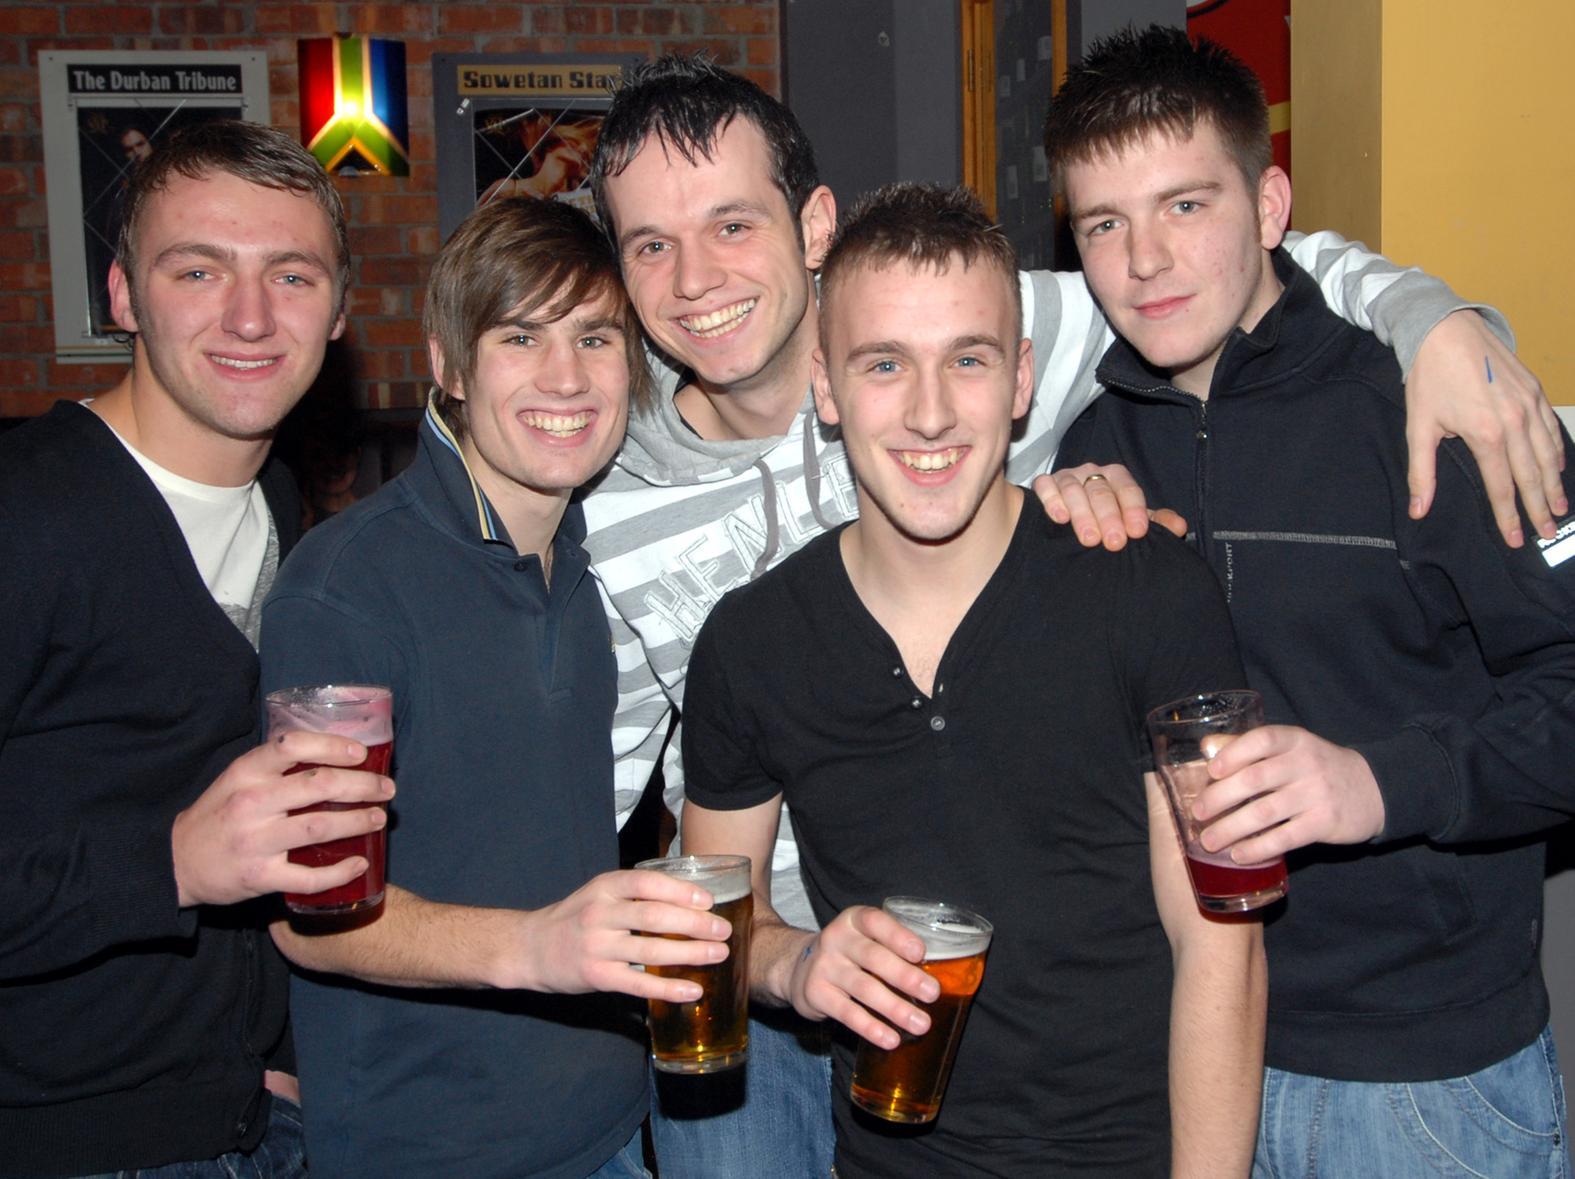 Lads out for a few pints.